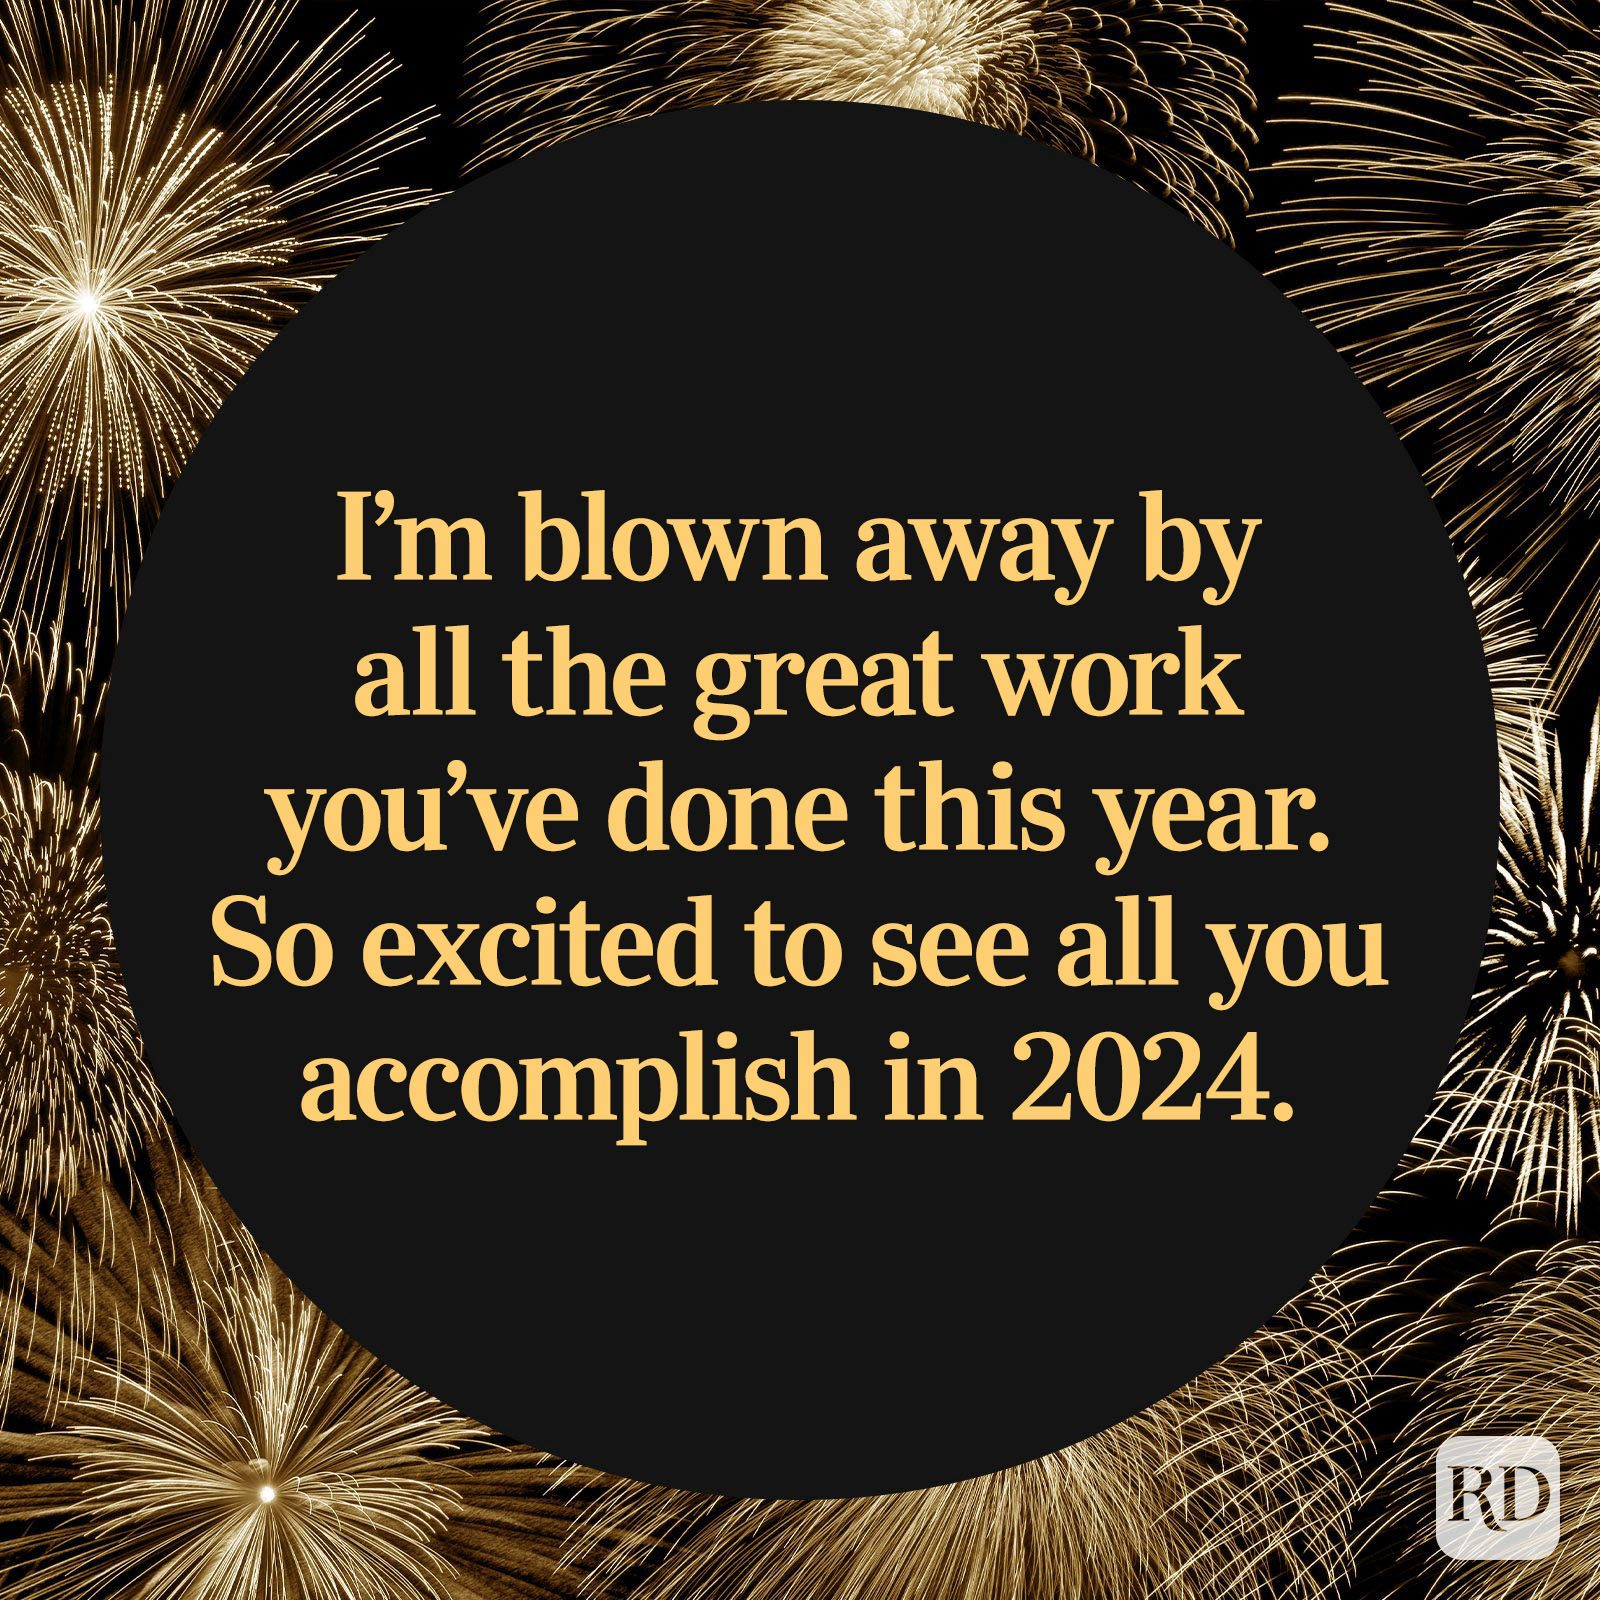 NEW YEAR'S EVE definition in American English